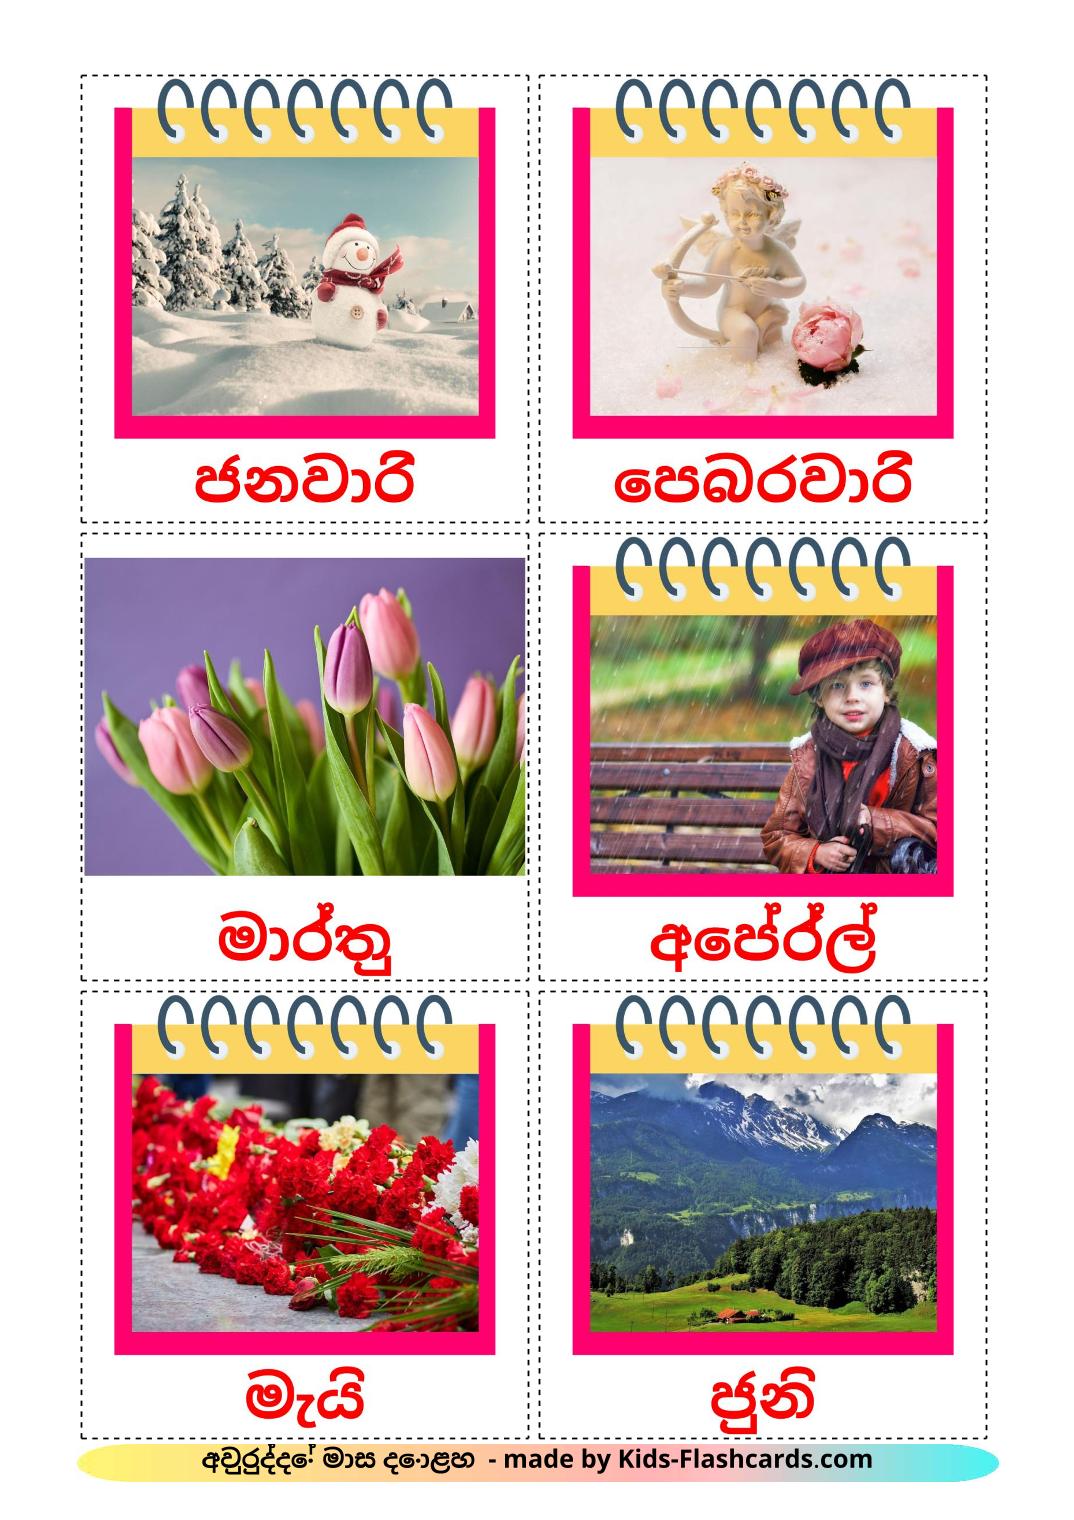 Months of the Year - 12 Free Printable sinhala Flashcards 